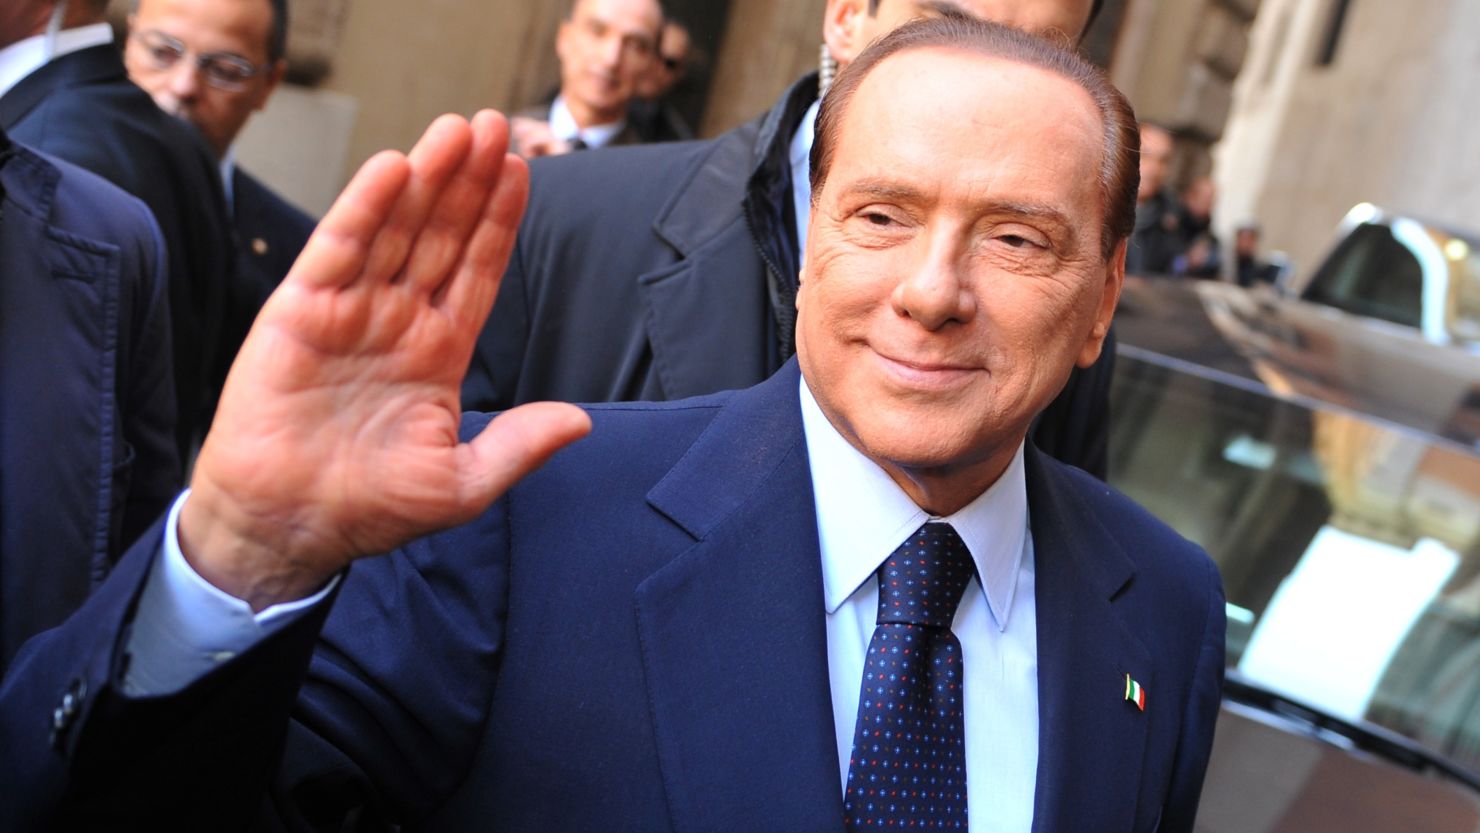 The 75-year-old Berlusconi dominated Italian politics for a decade and a half before resigning amid a financial crisis in November 2011. 